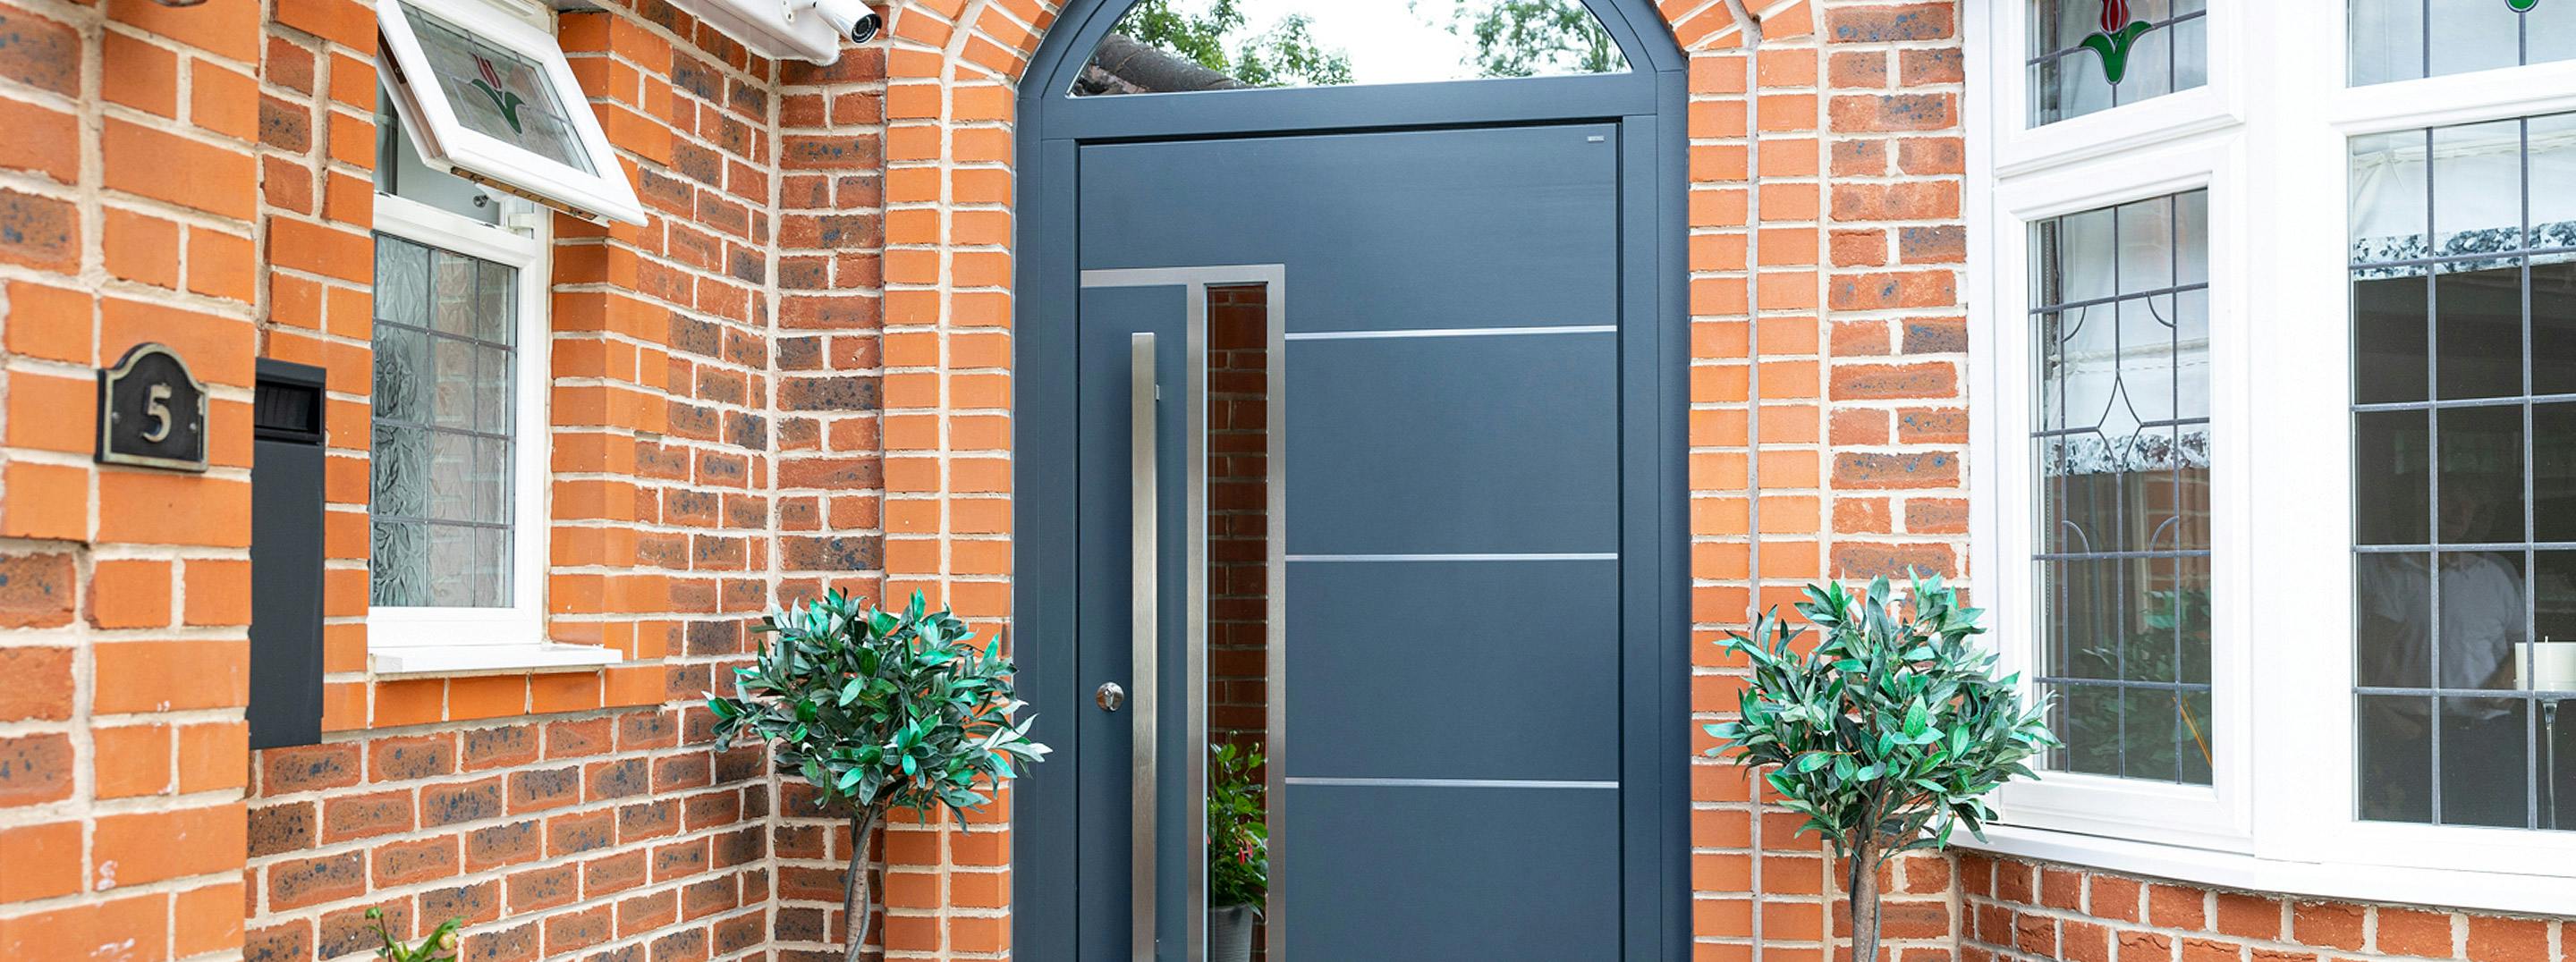 Modern front door made by Deuren - Pianura 2 style with a vertical glazed panel along side a long bar handle. Has 4 evenly spaced horizontal stainless steel inlays